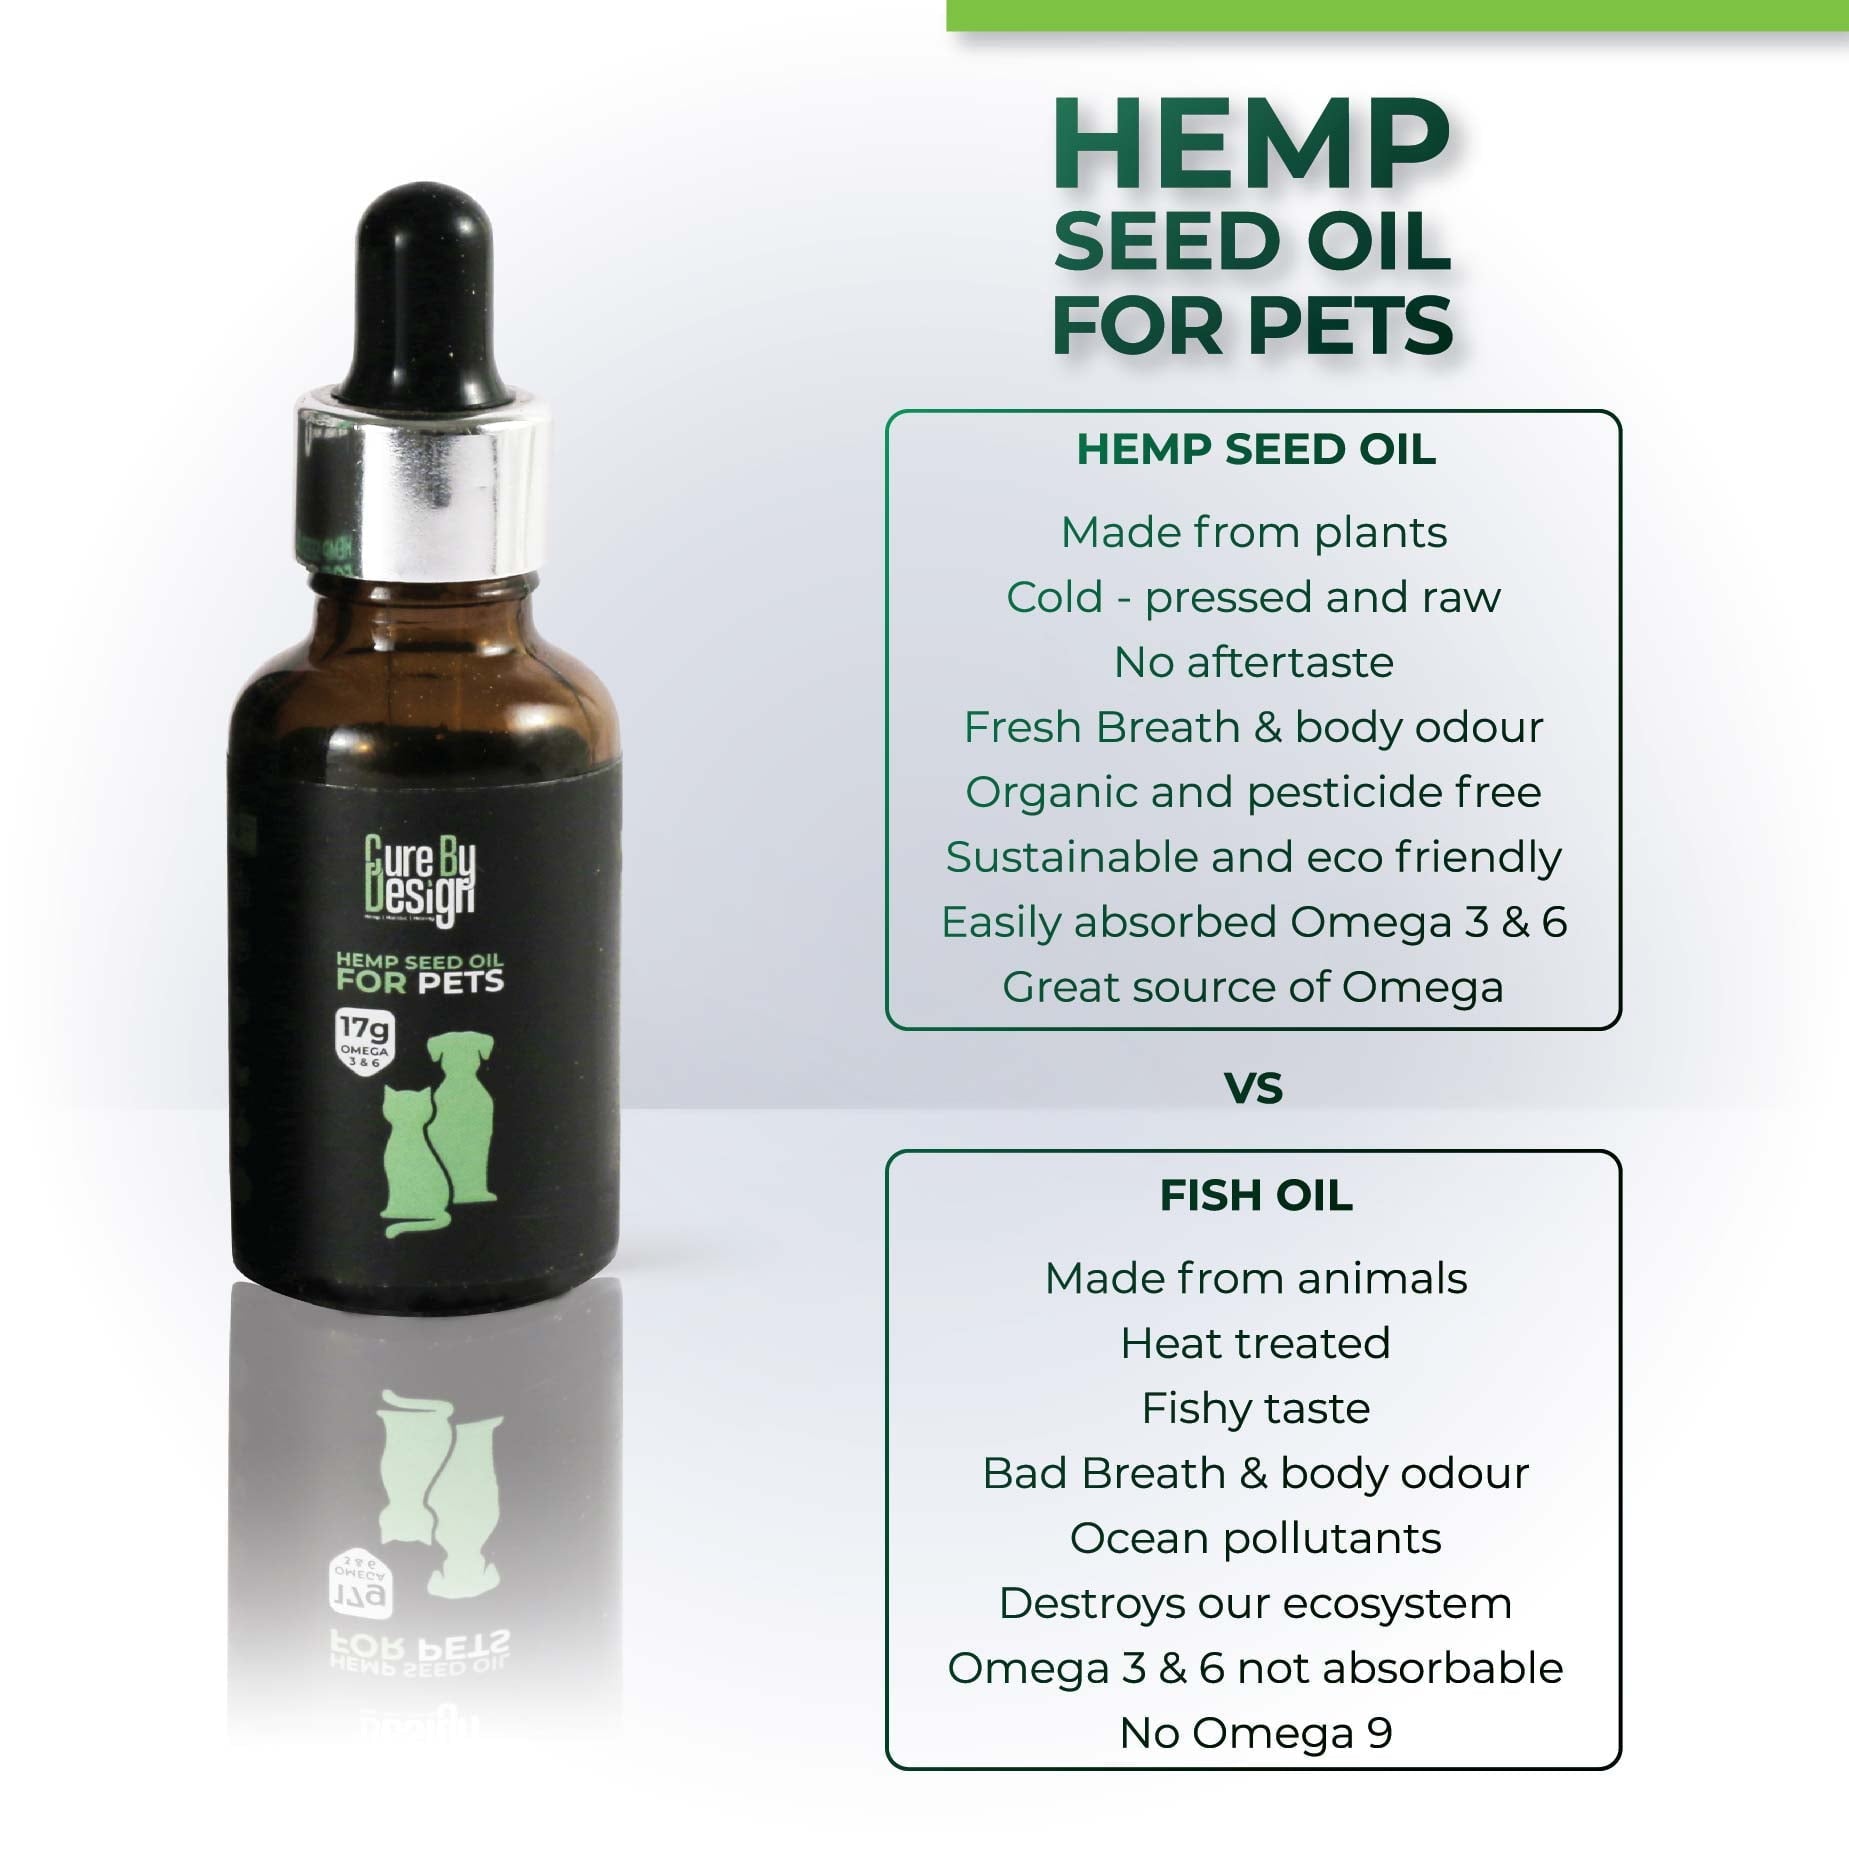 Cure By Design Hemp Seed Oil For Pets - CBD Store India